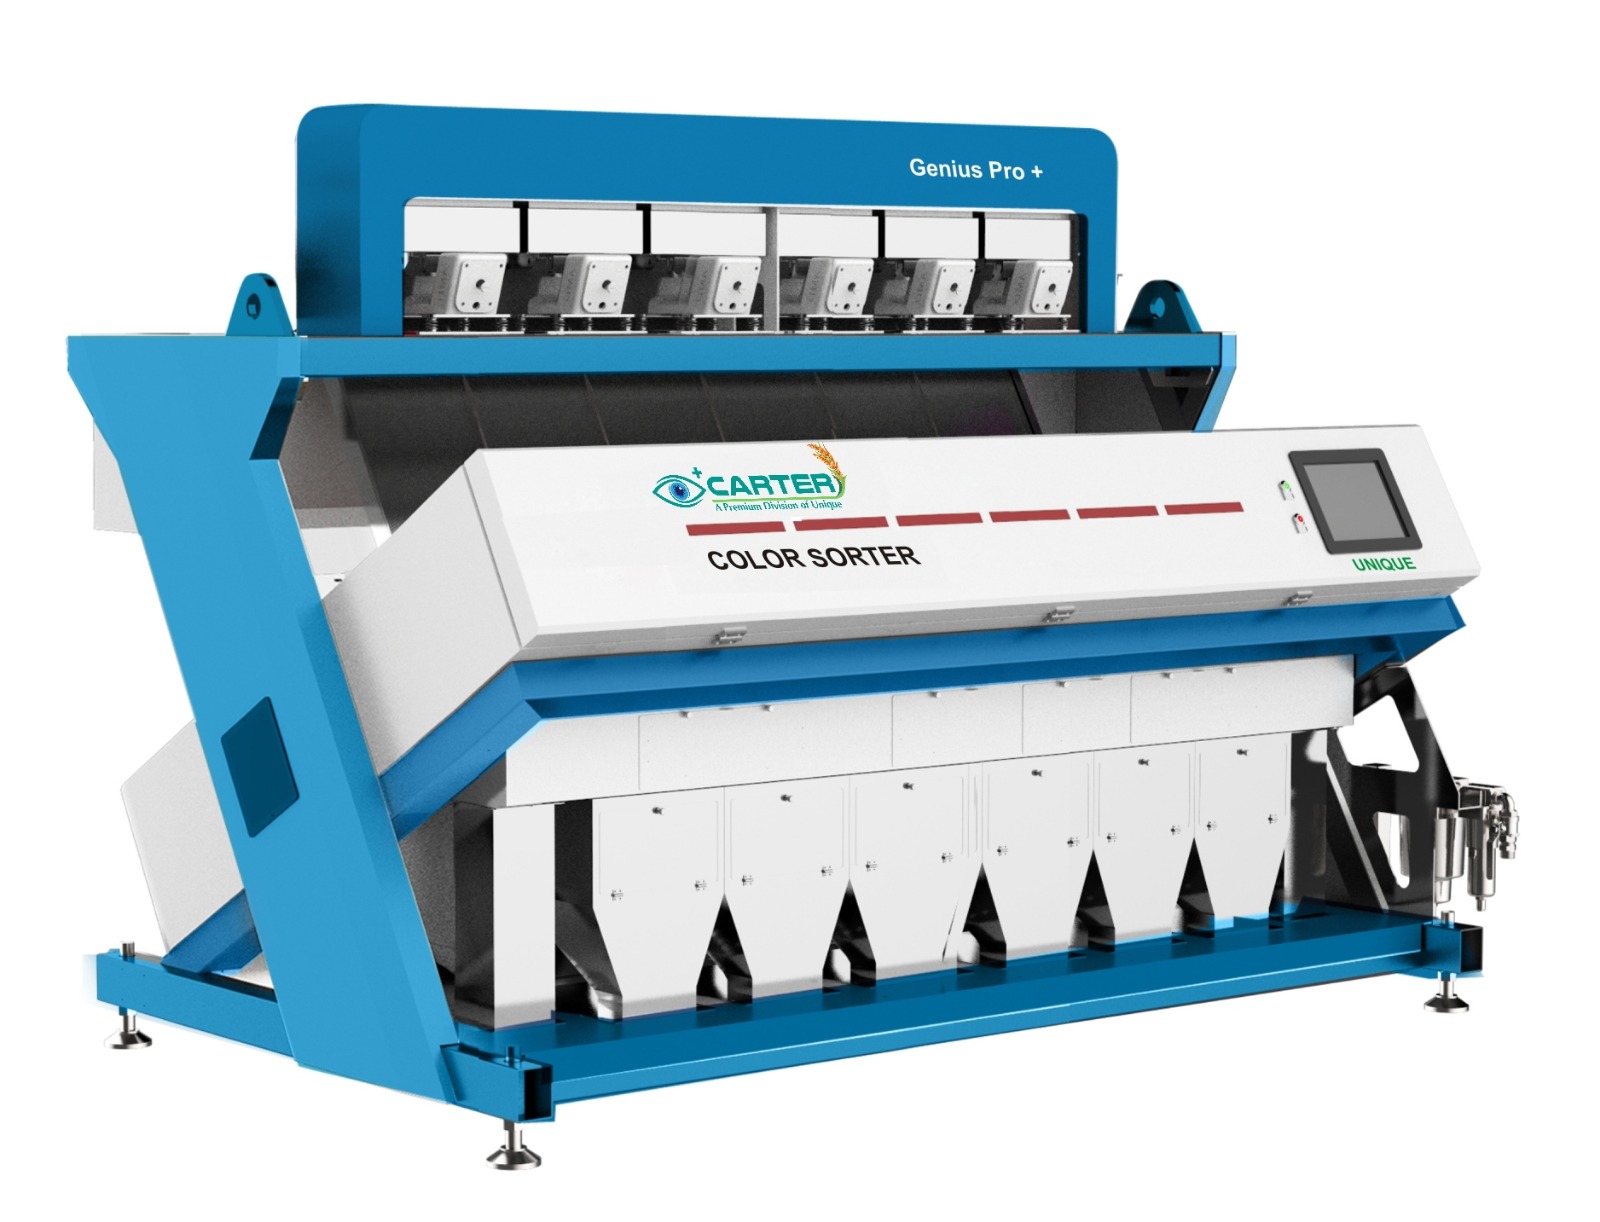  The Evolution of Color Sortex Machines: Enhancing Quality and Efficiency